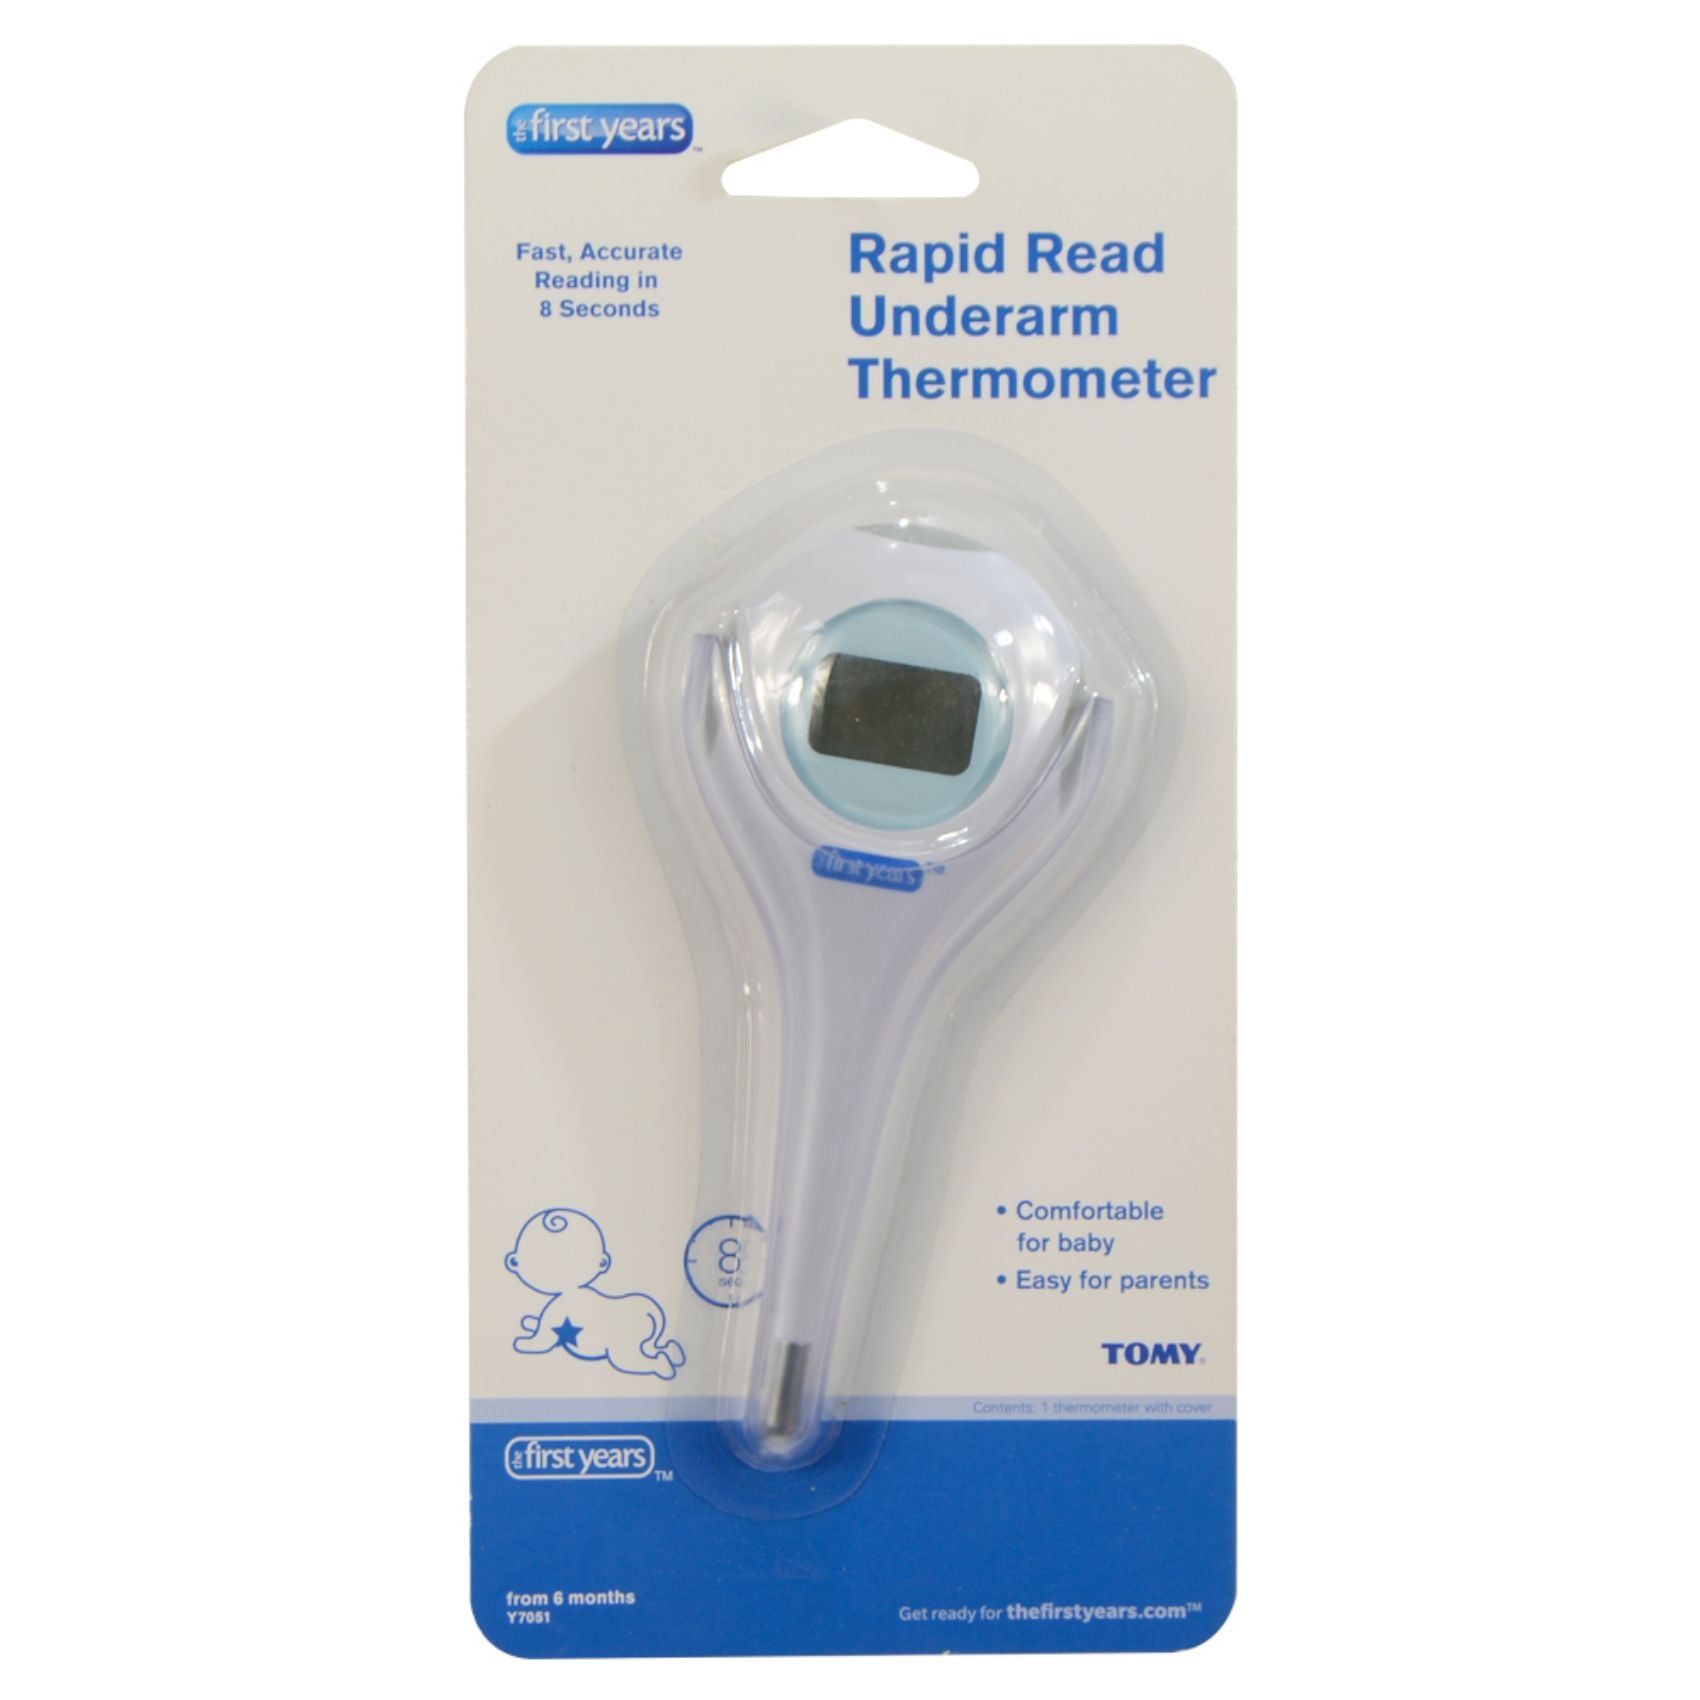 The First Years -Rapid Read Underarm Thermometer